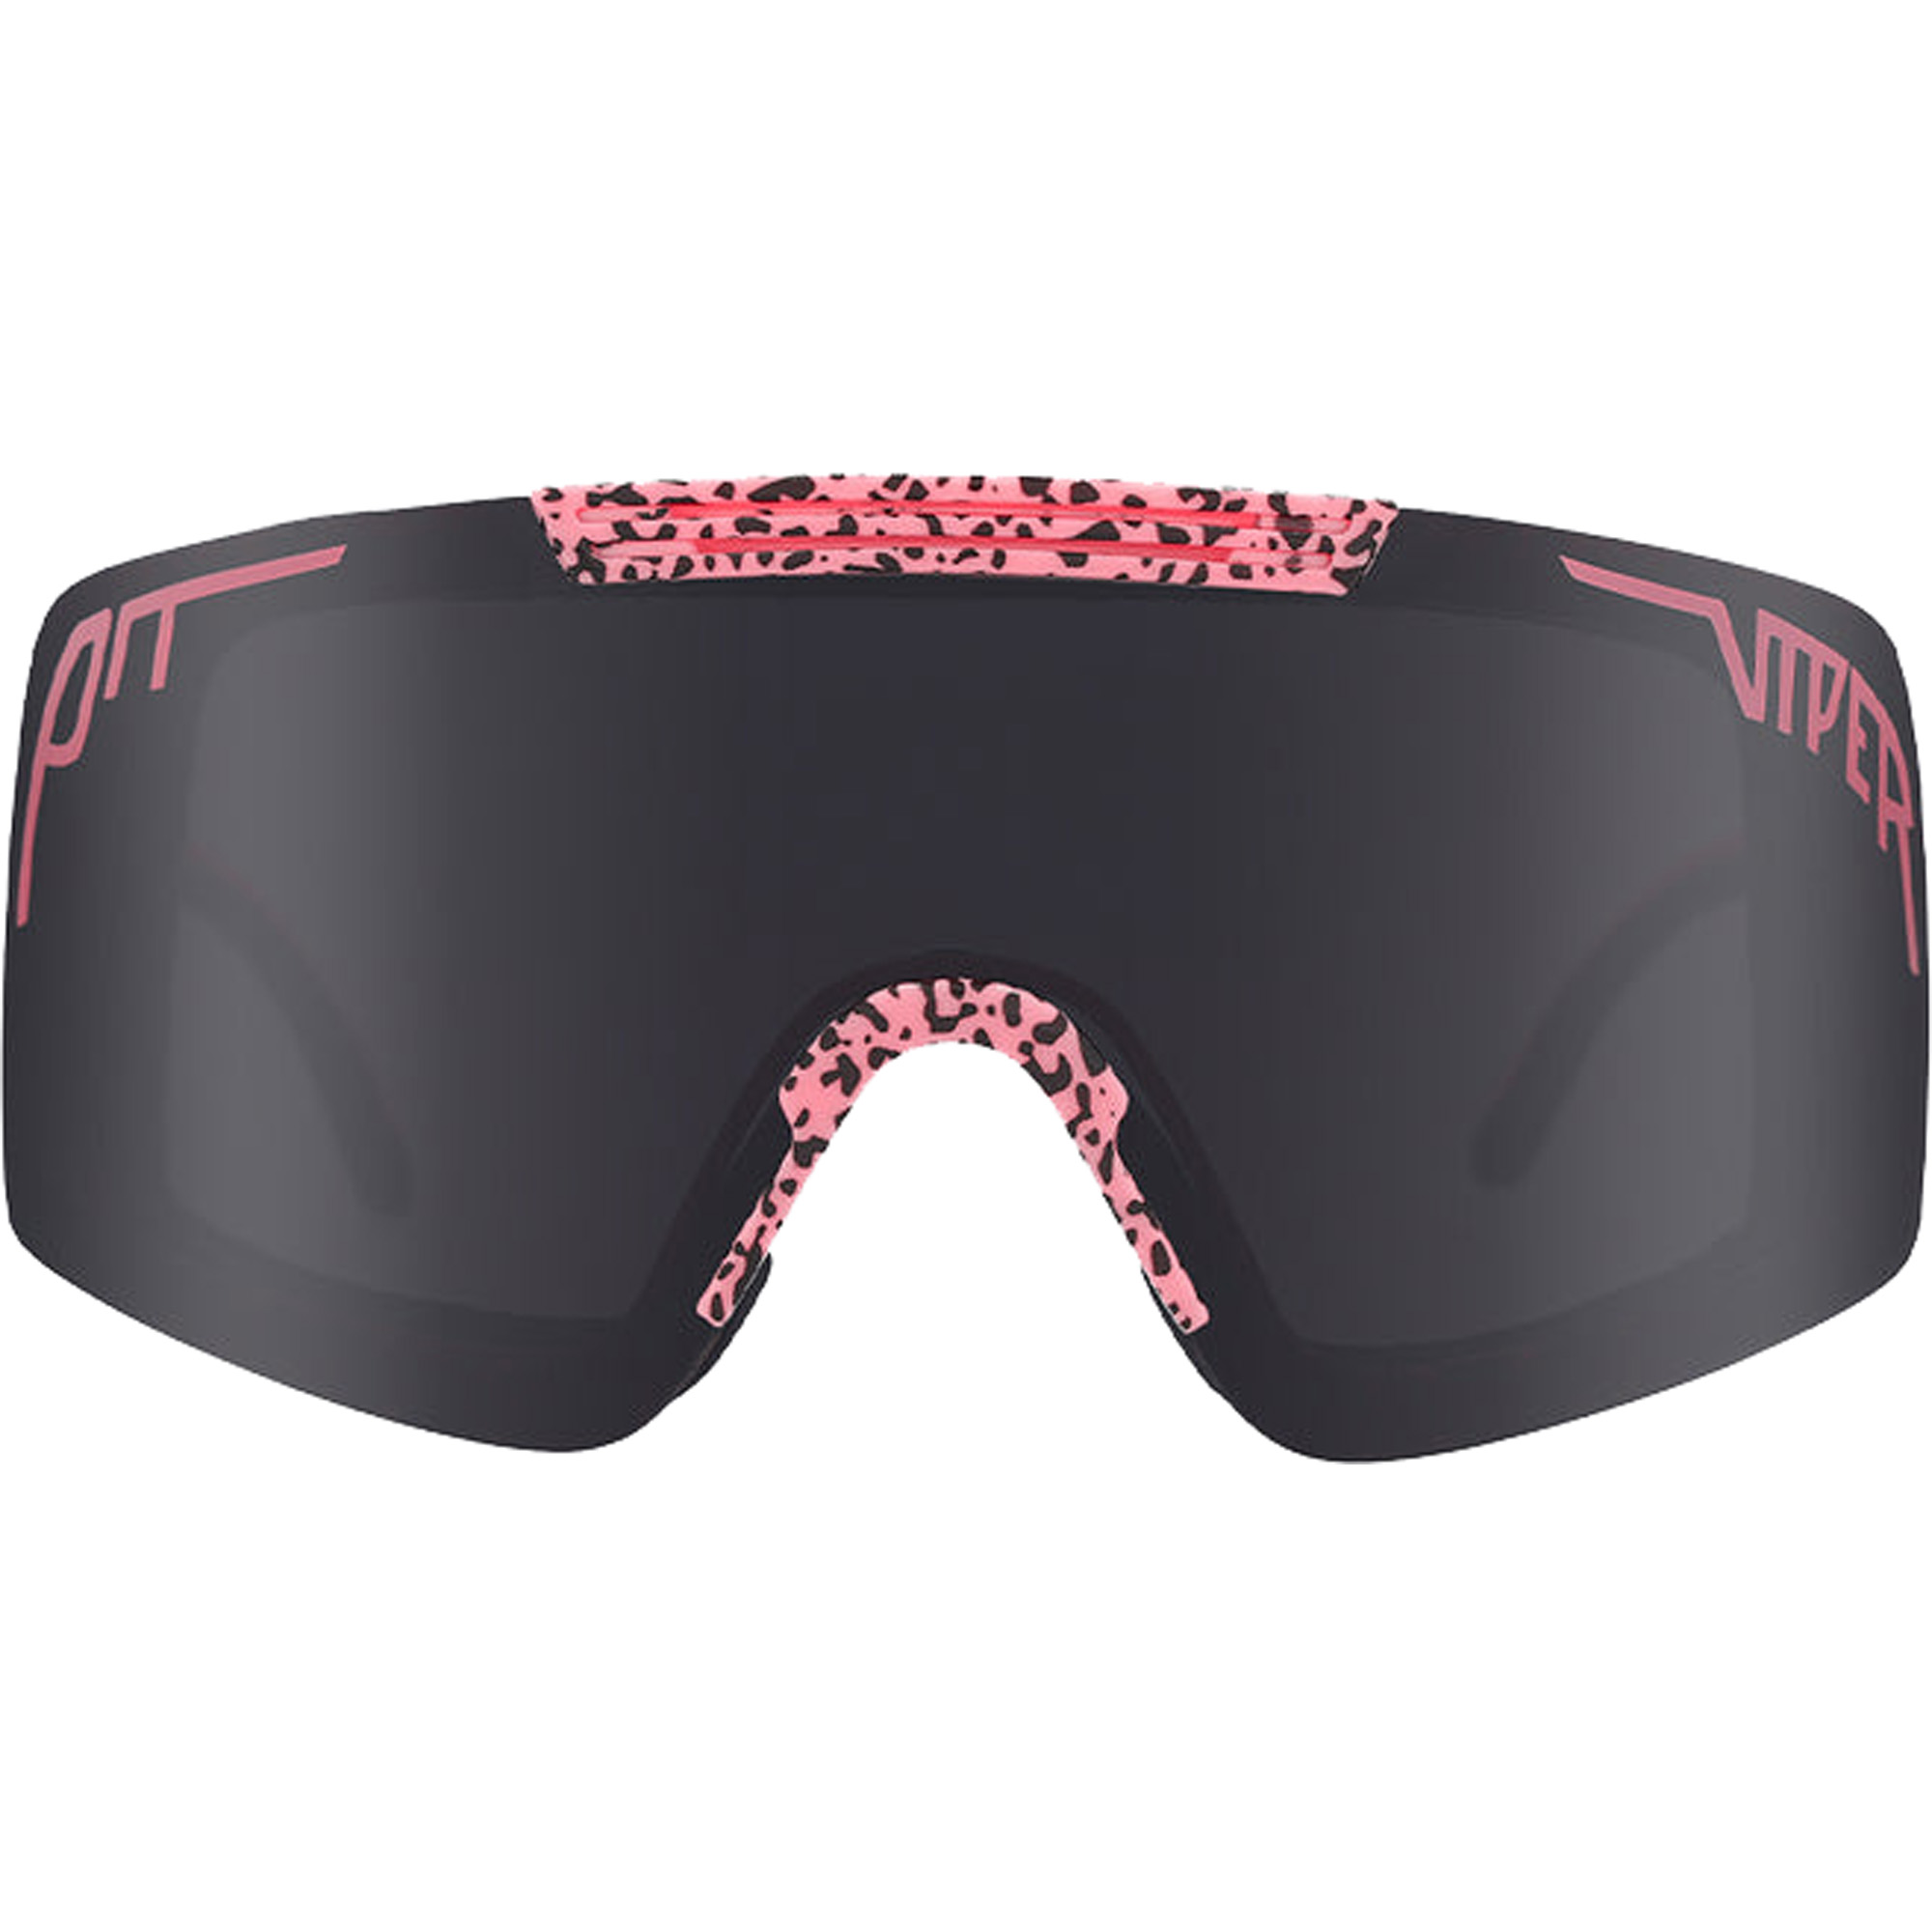 Pit Viper The Synthesizer Sunglasses